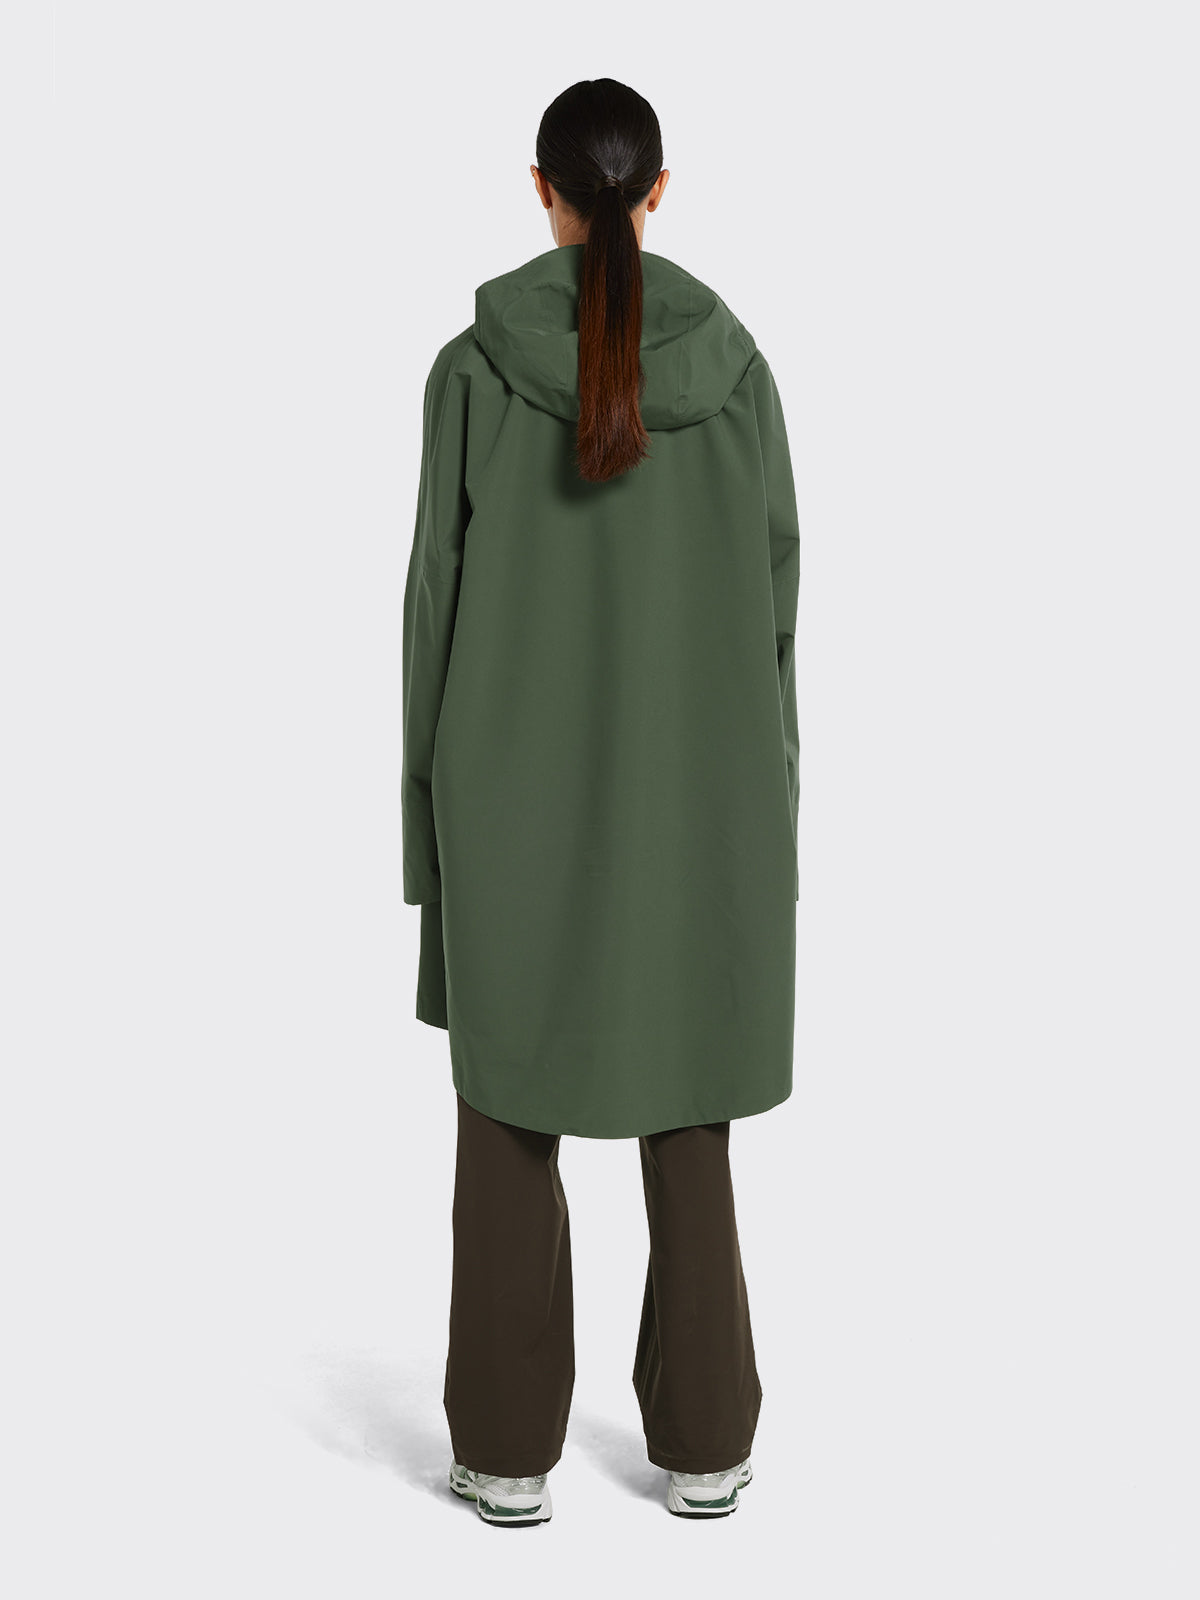 Aalesund poncho from Blæst in Dusty Green